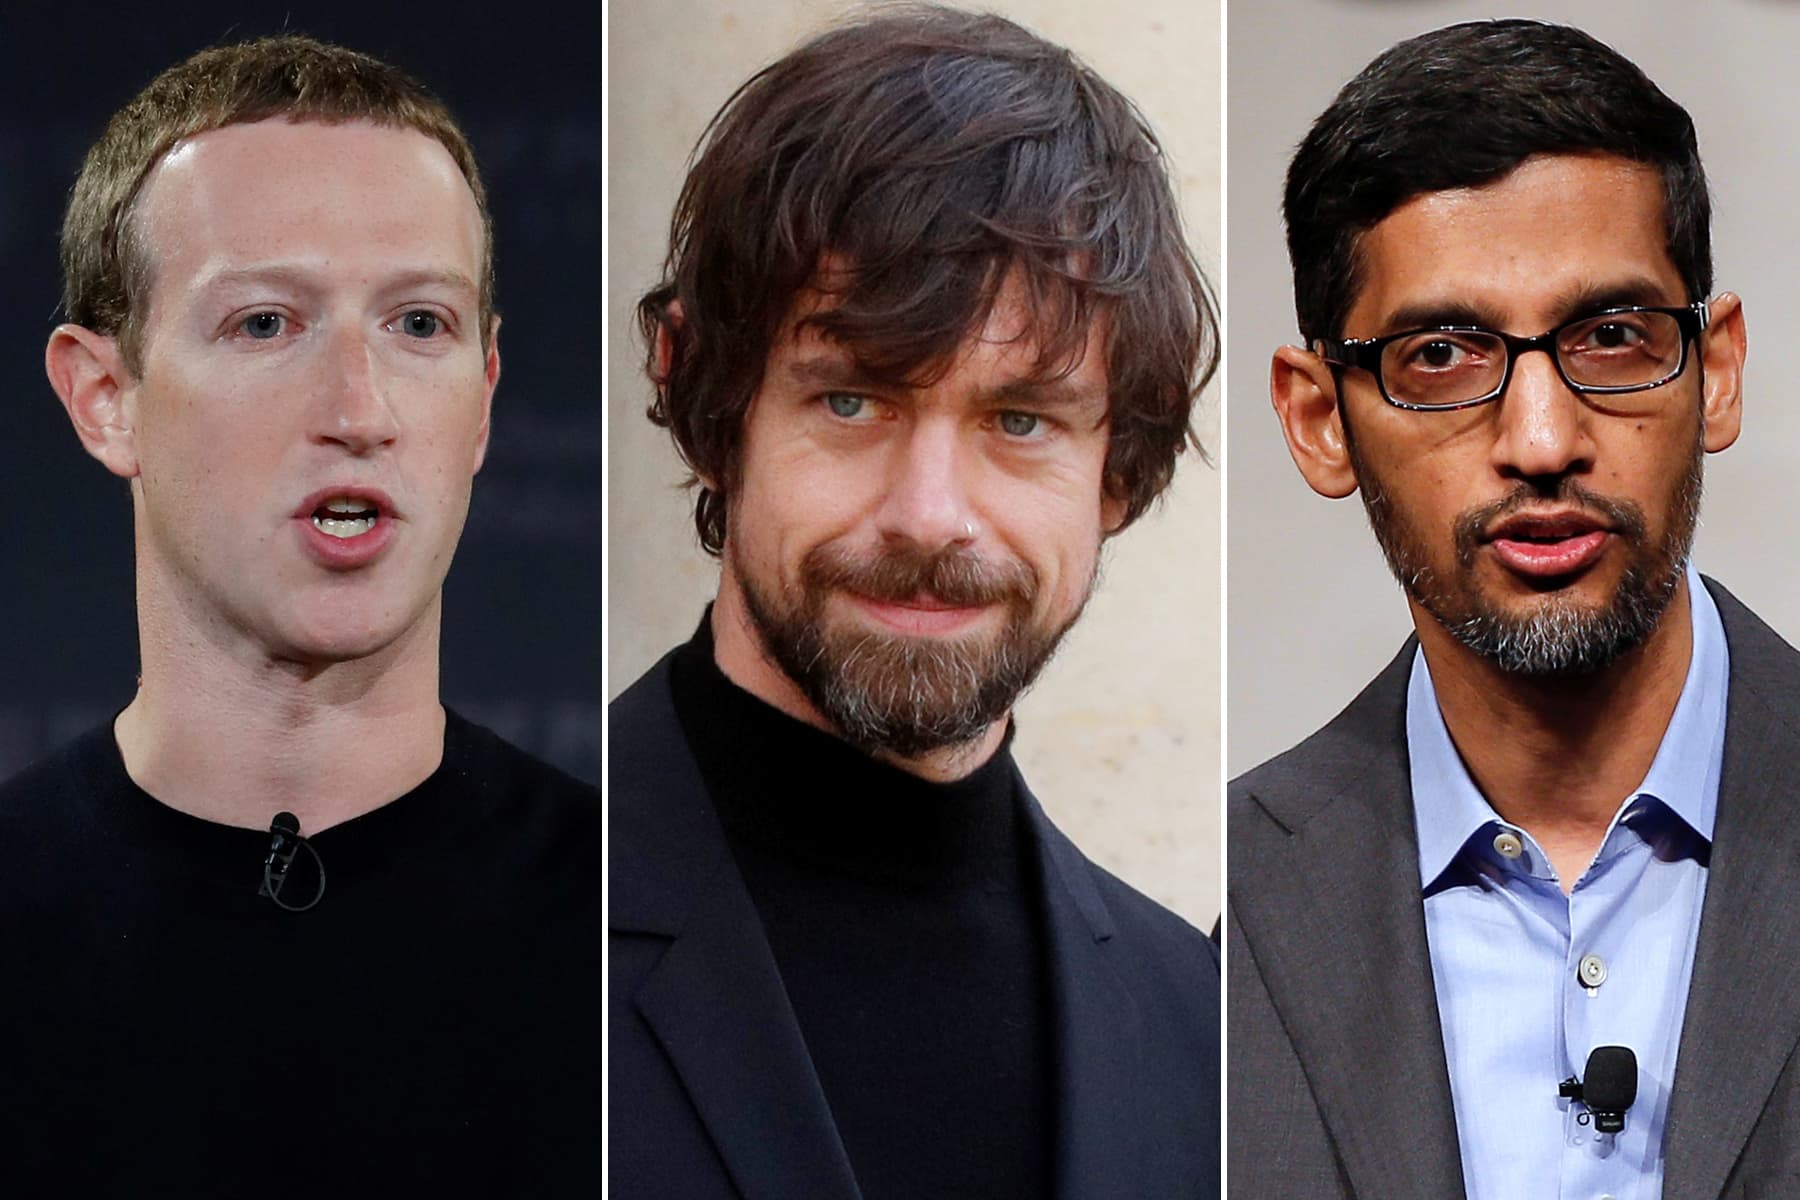 Facebook, Google, Twitter CEOs to testify before Congress in March